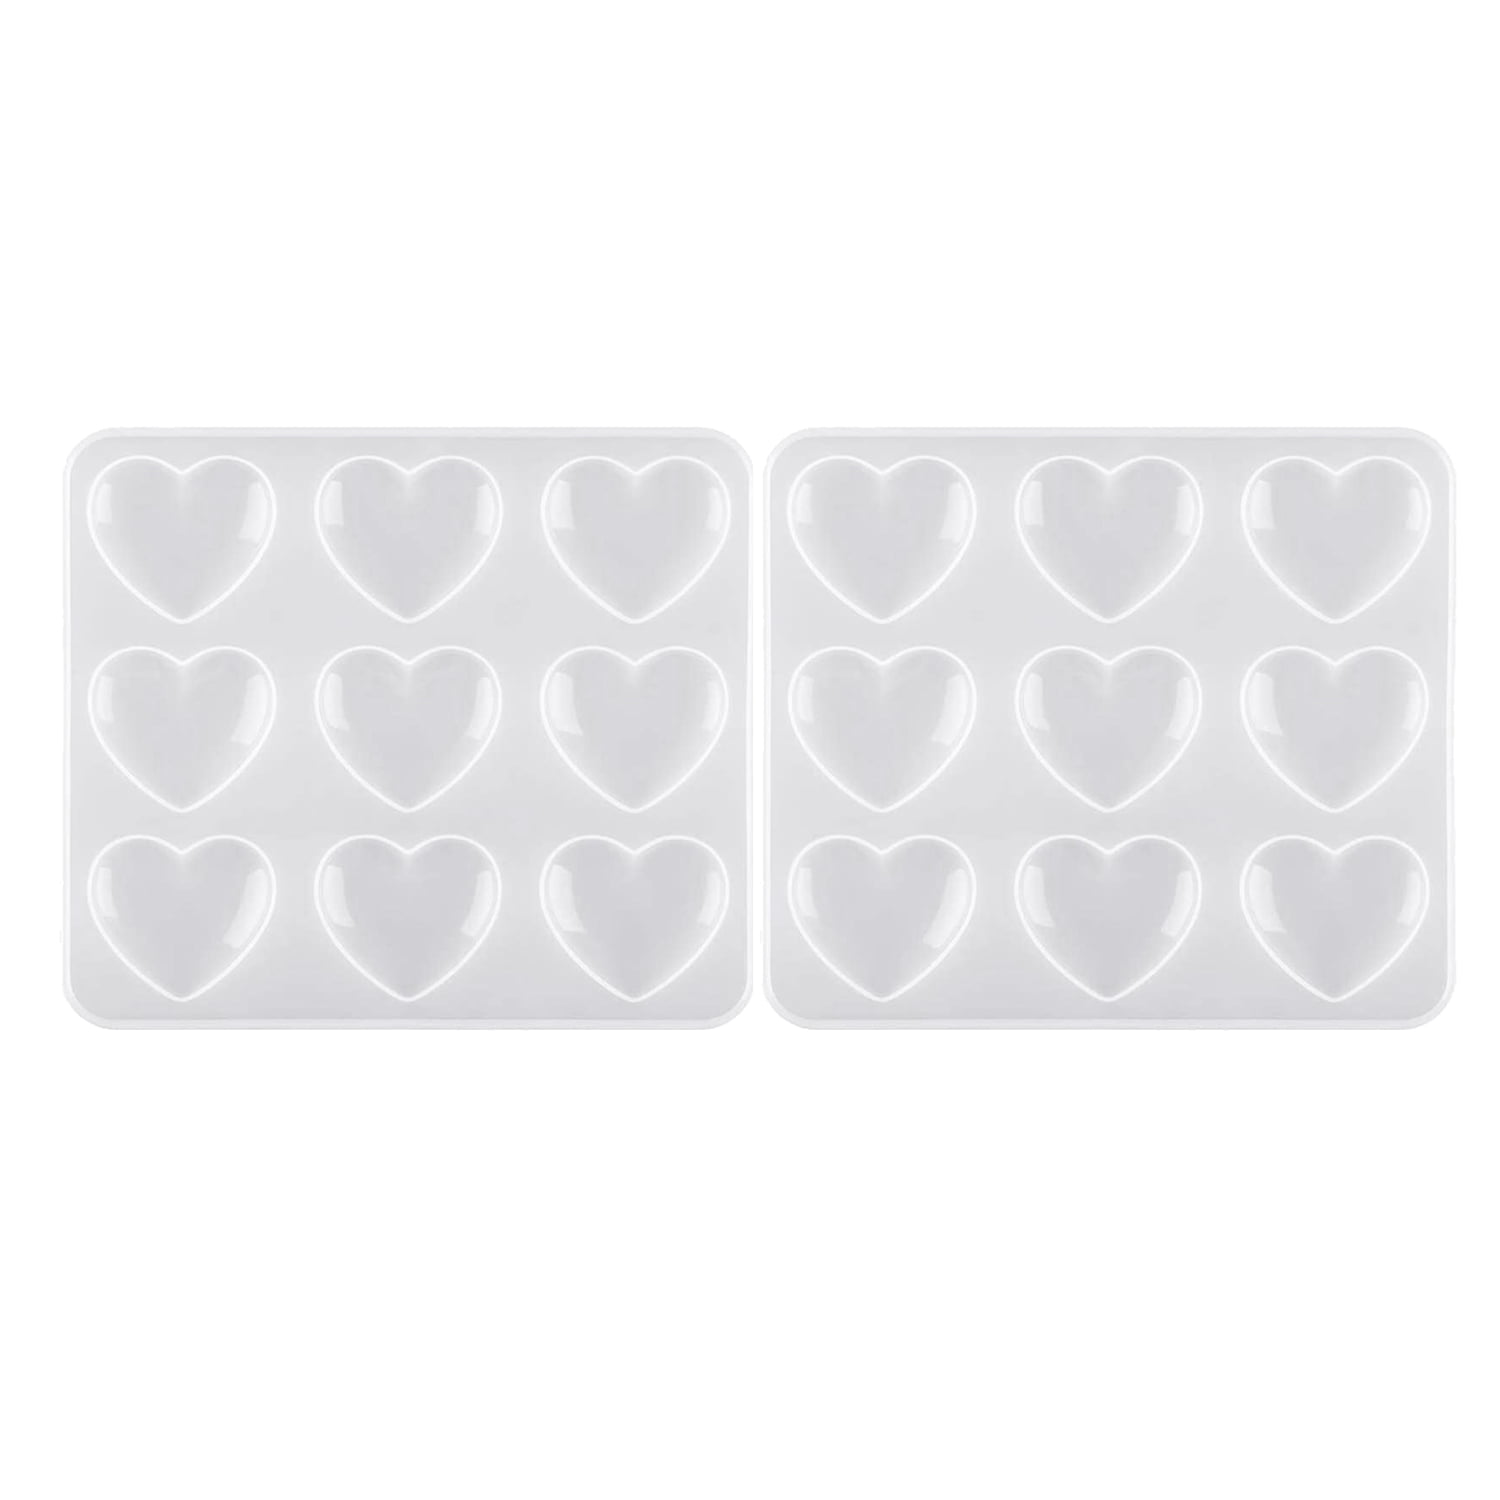 2pcs Resin Epoxy Earring Molds, EEEkit Silicone Casting Molds for Jewelry Resin Craft Casting, Leaf, Teardrop, Round, Heart Shaped, Snowflake Pendant